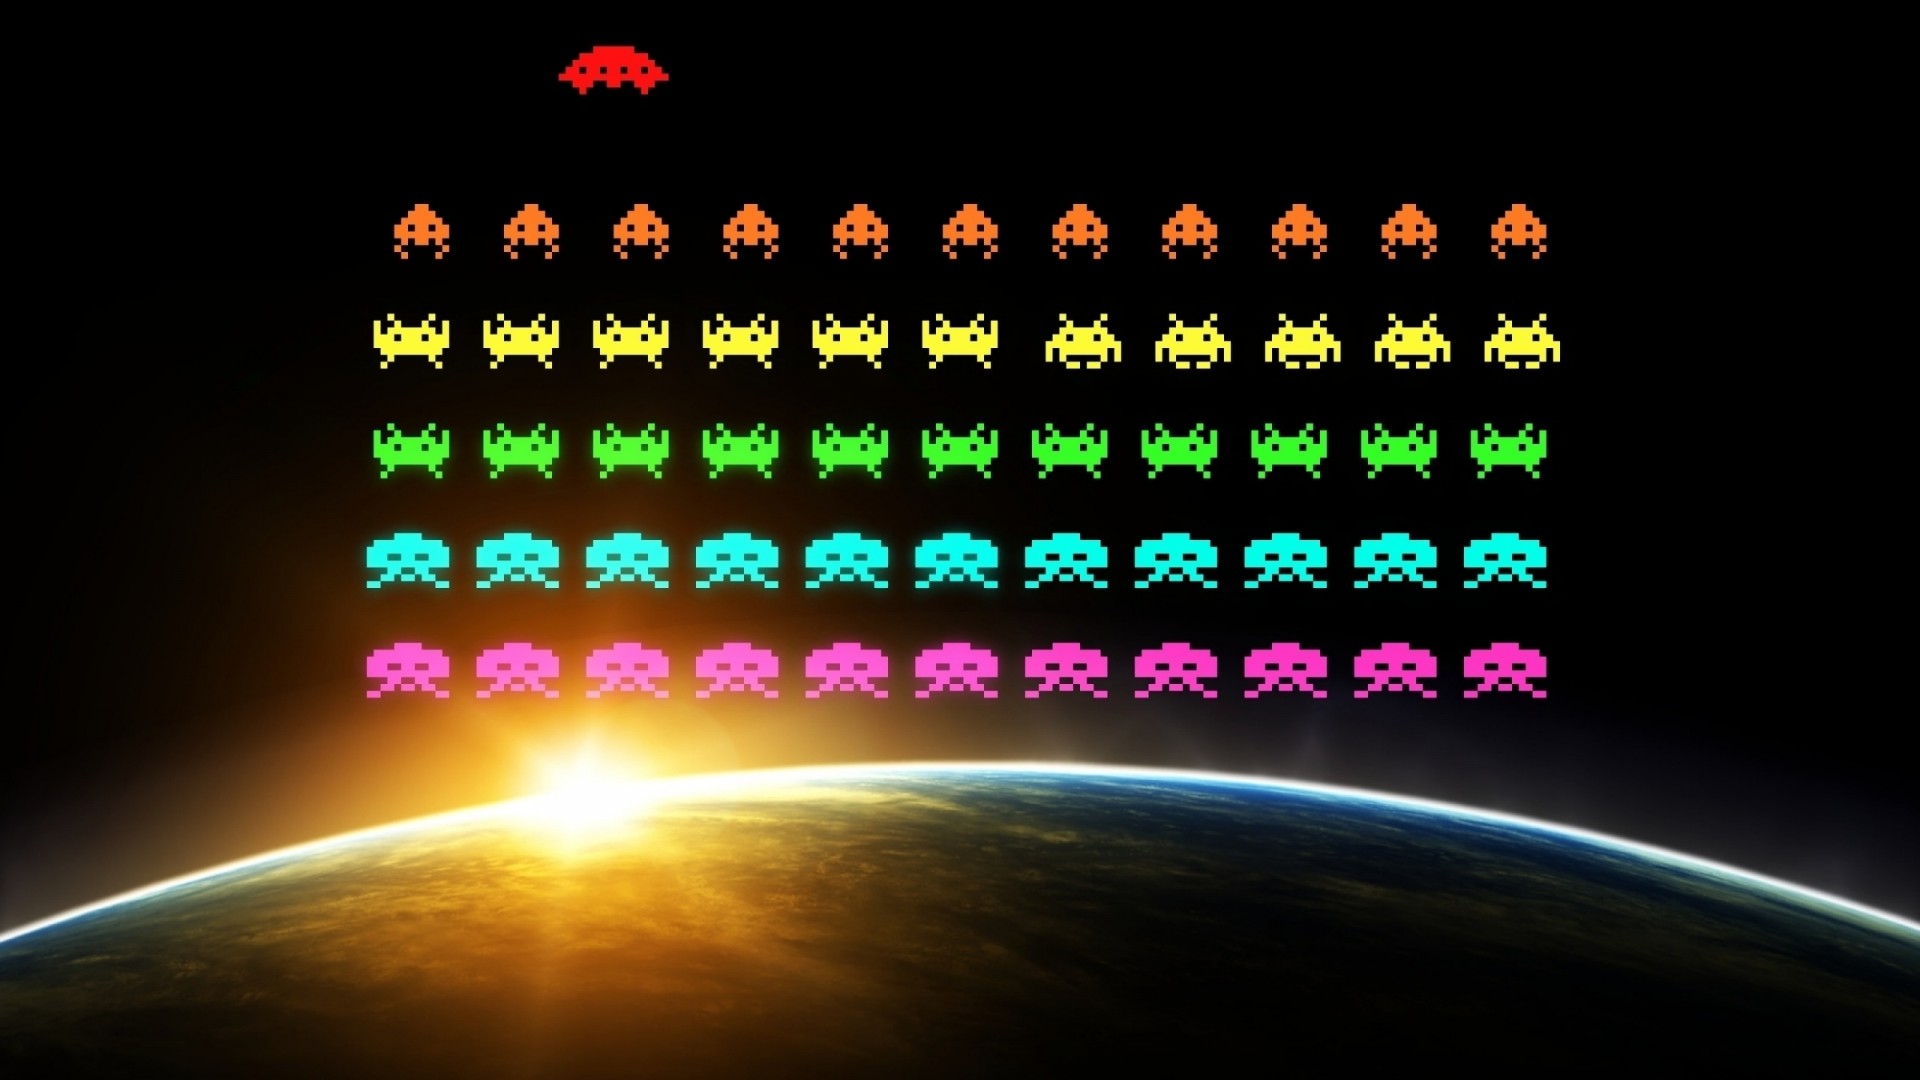 1920x1080 Search Results for “space invader wallpaper for walls” – Adorable Wallpapers